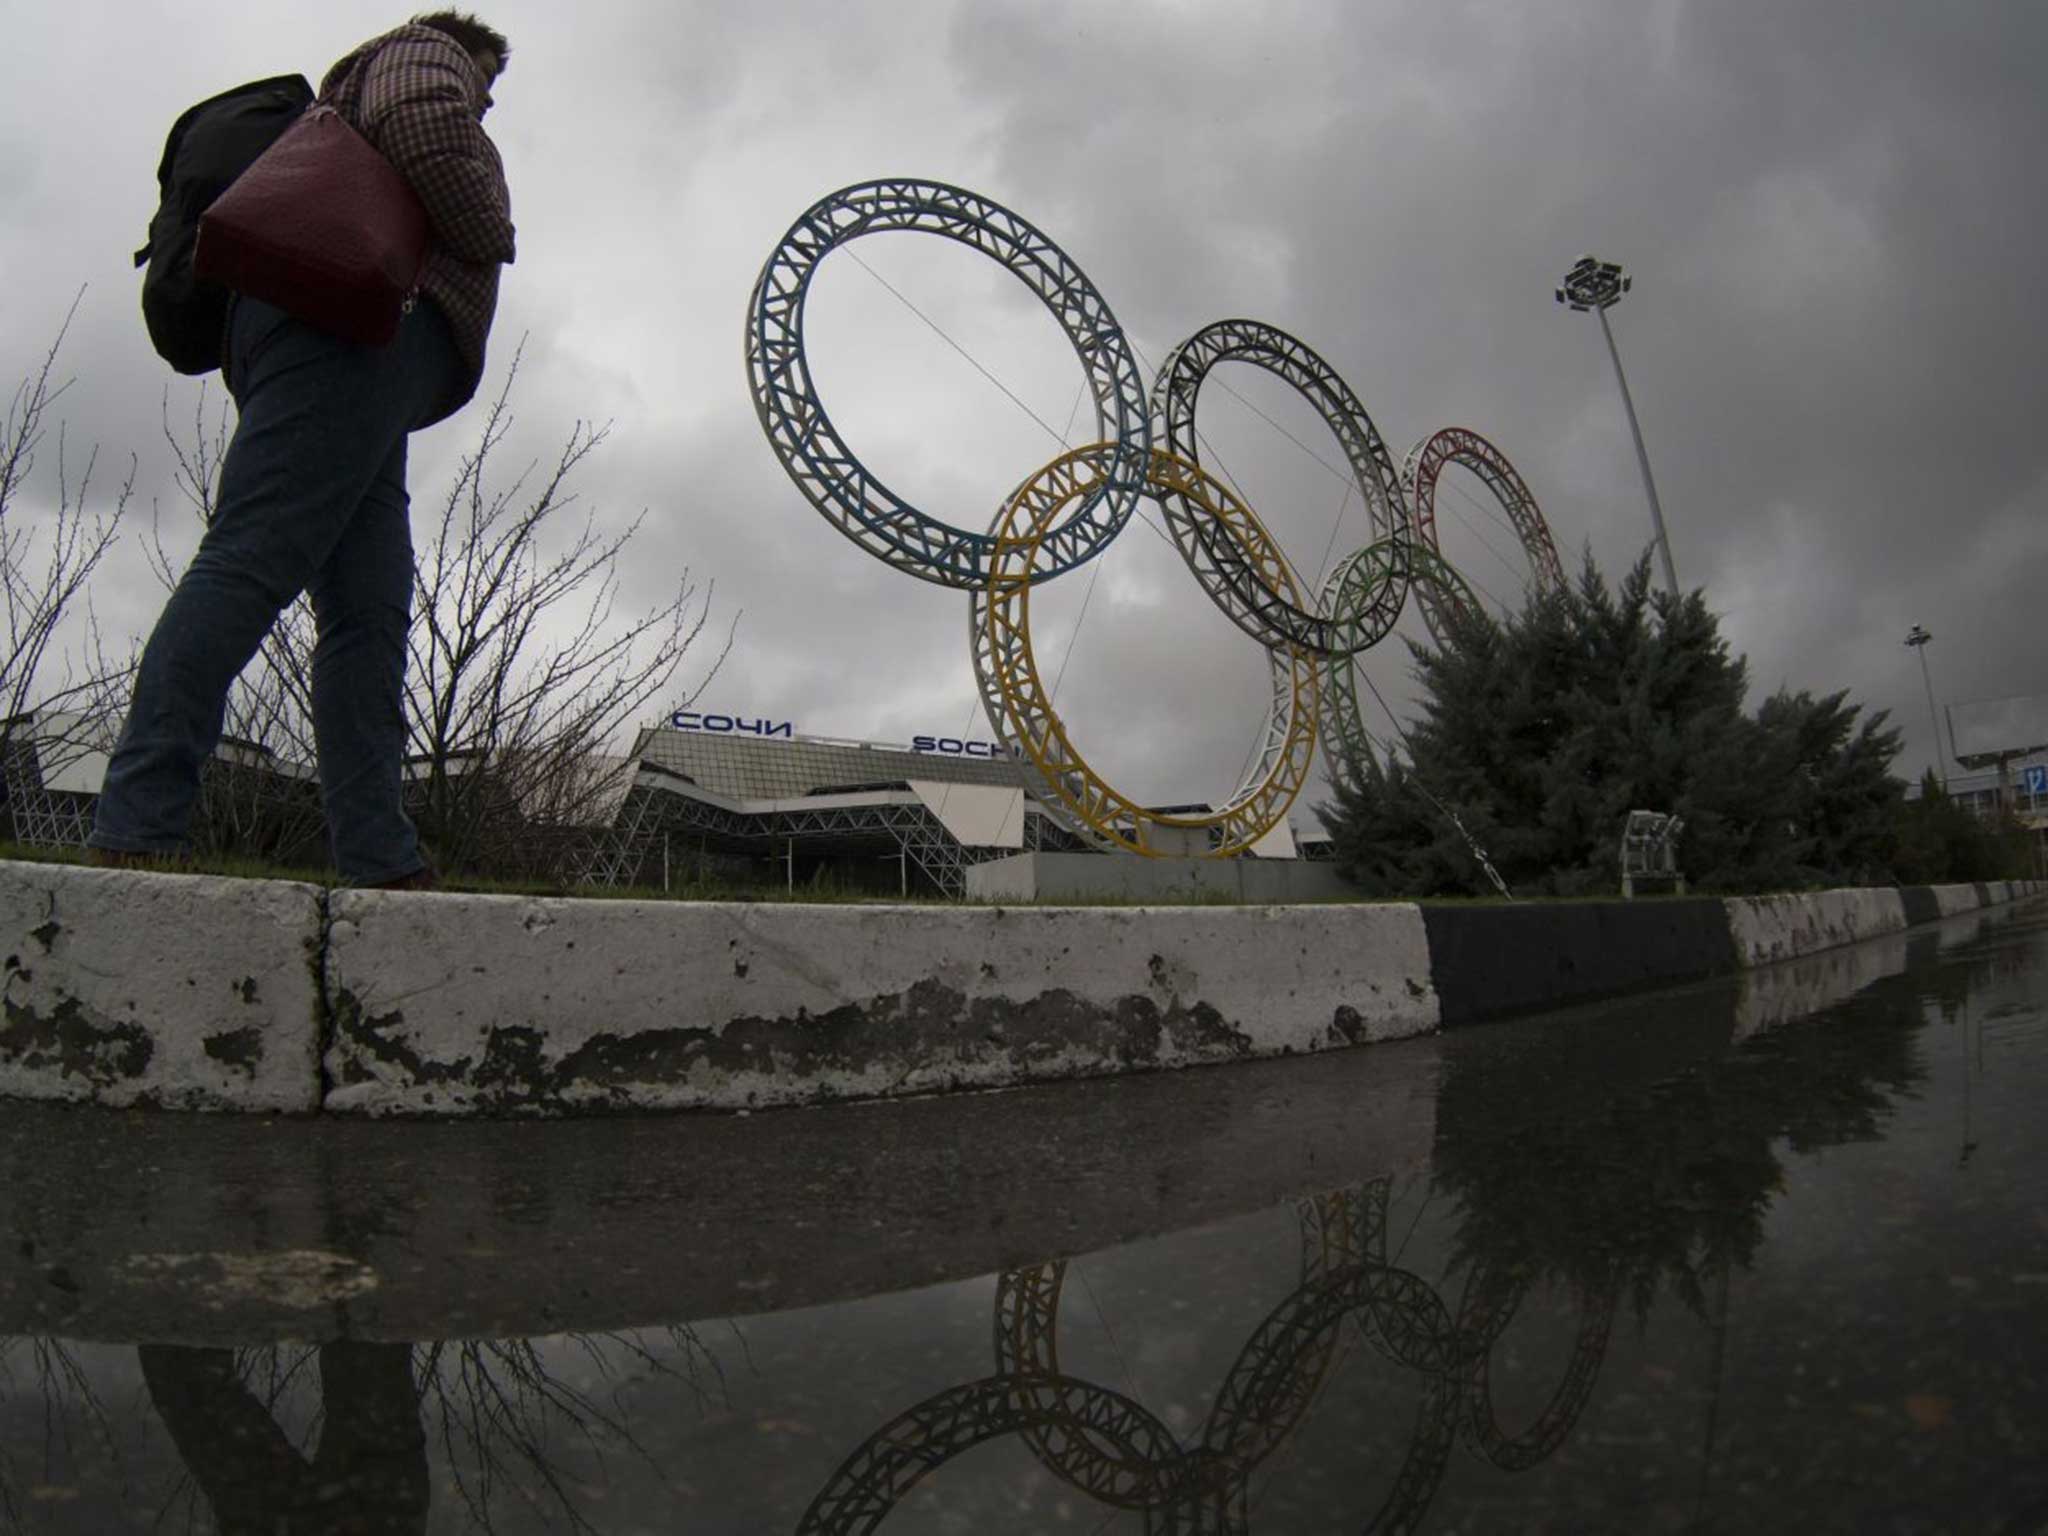 A woman walks past the seemingly abandoned Sochi grounds